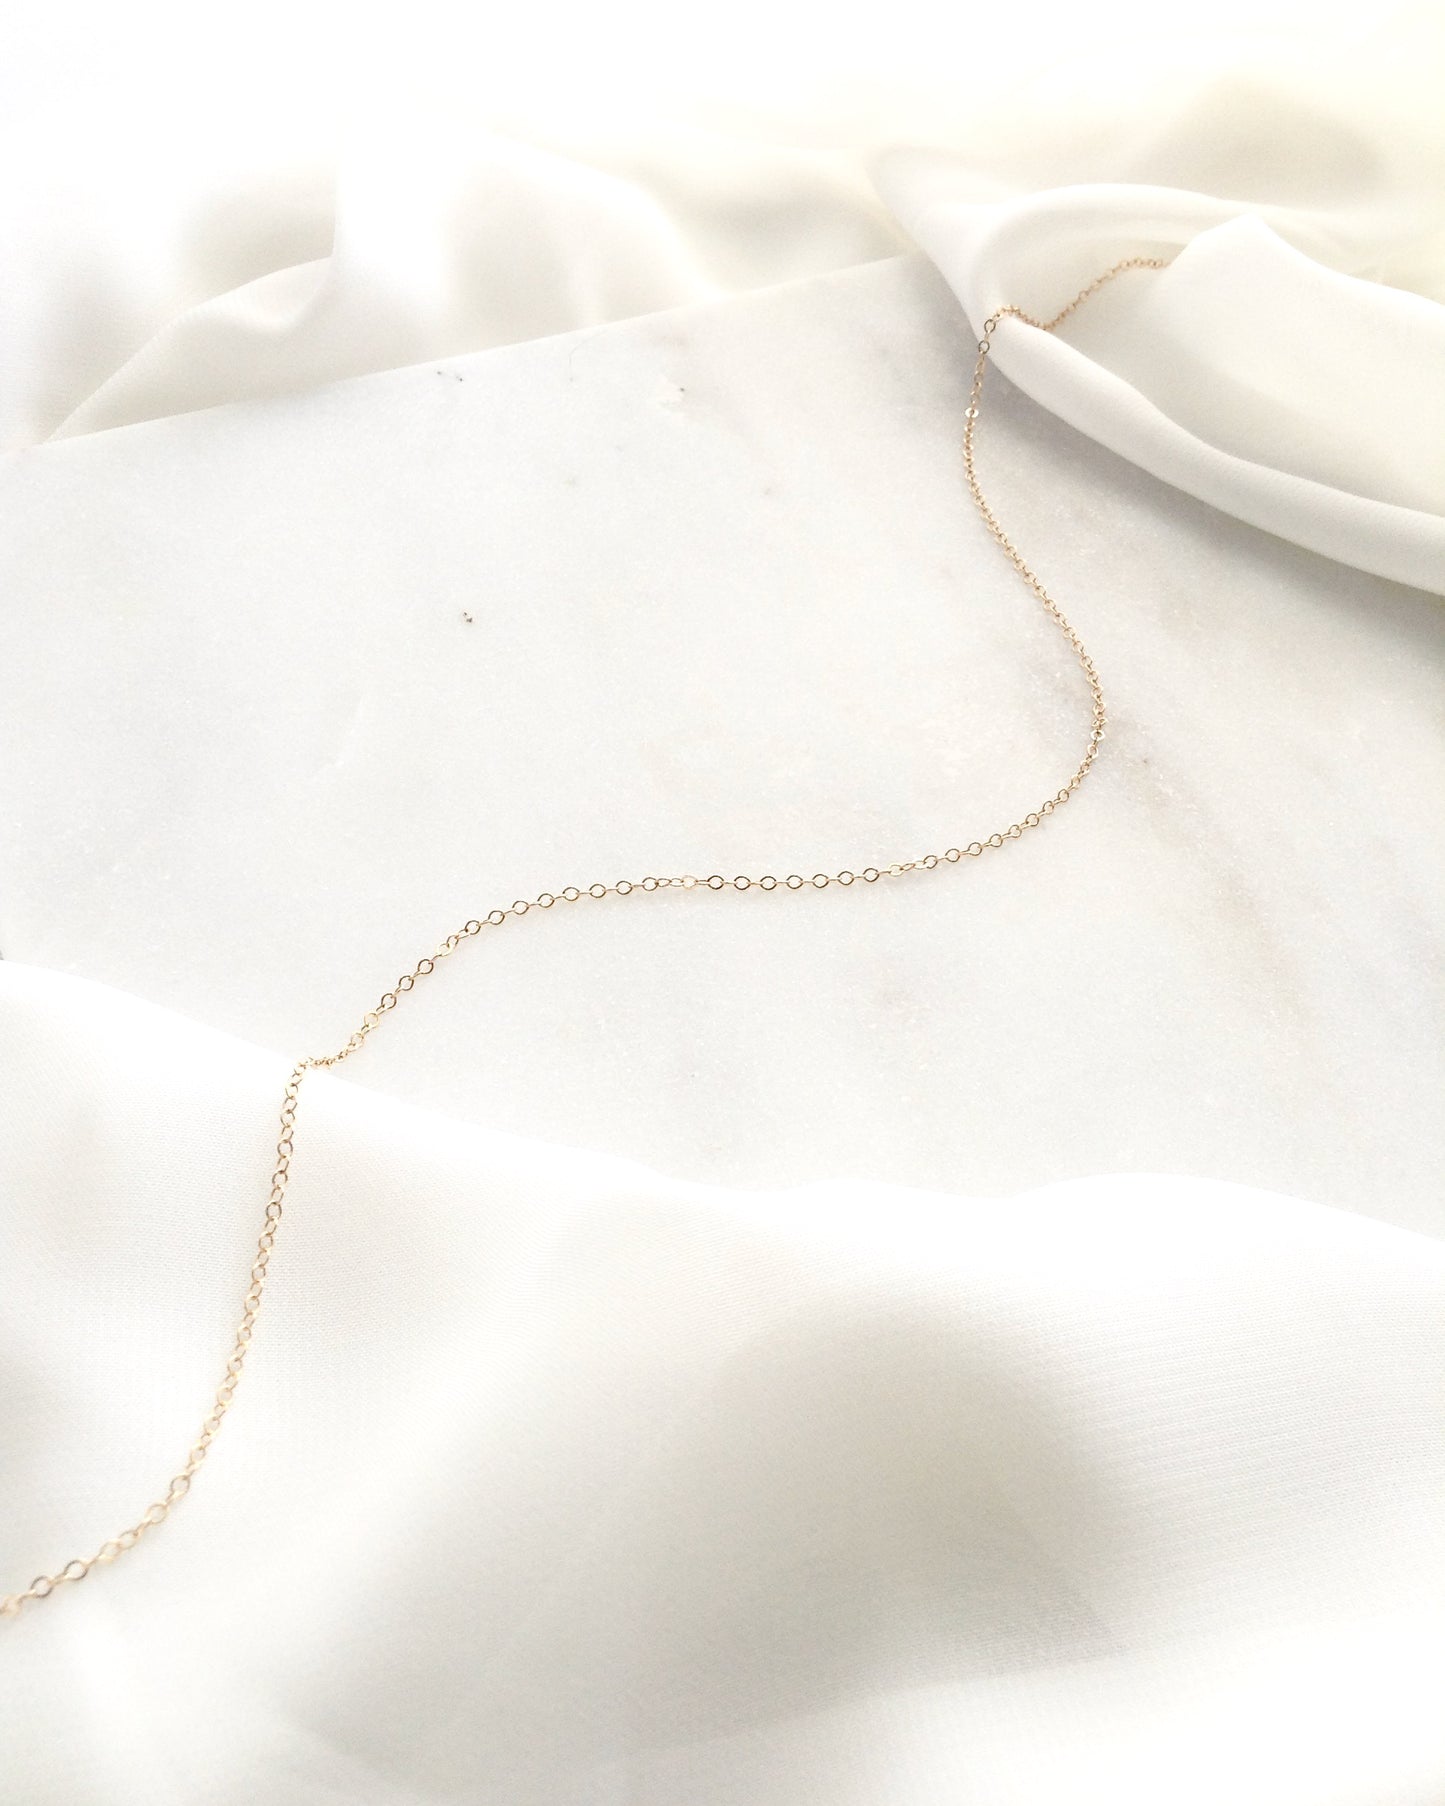 Delicate Chain Choker | Simple Dainty Choker in Gold Filled or Sterling Silver | IB Jewelry